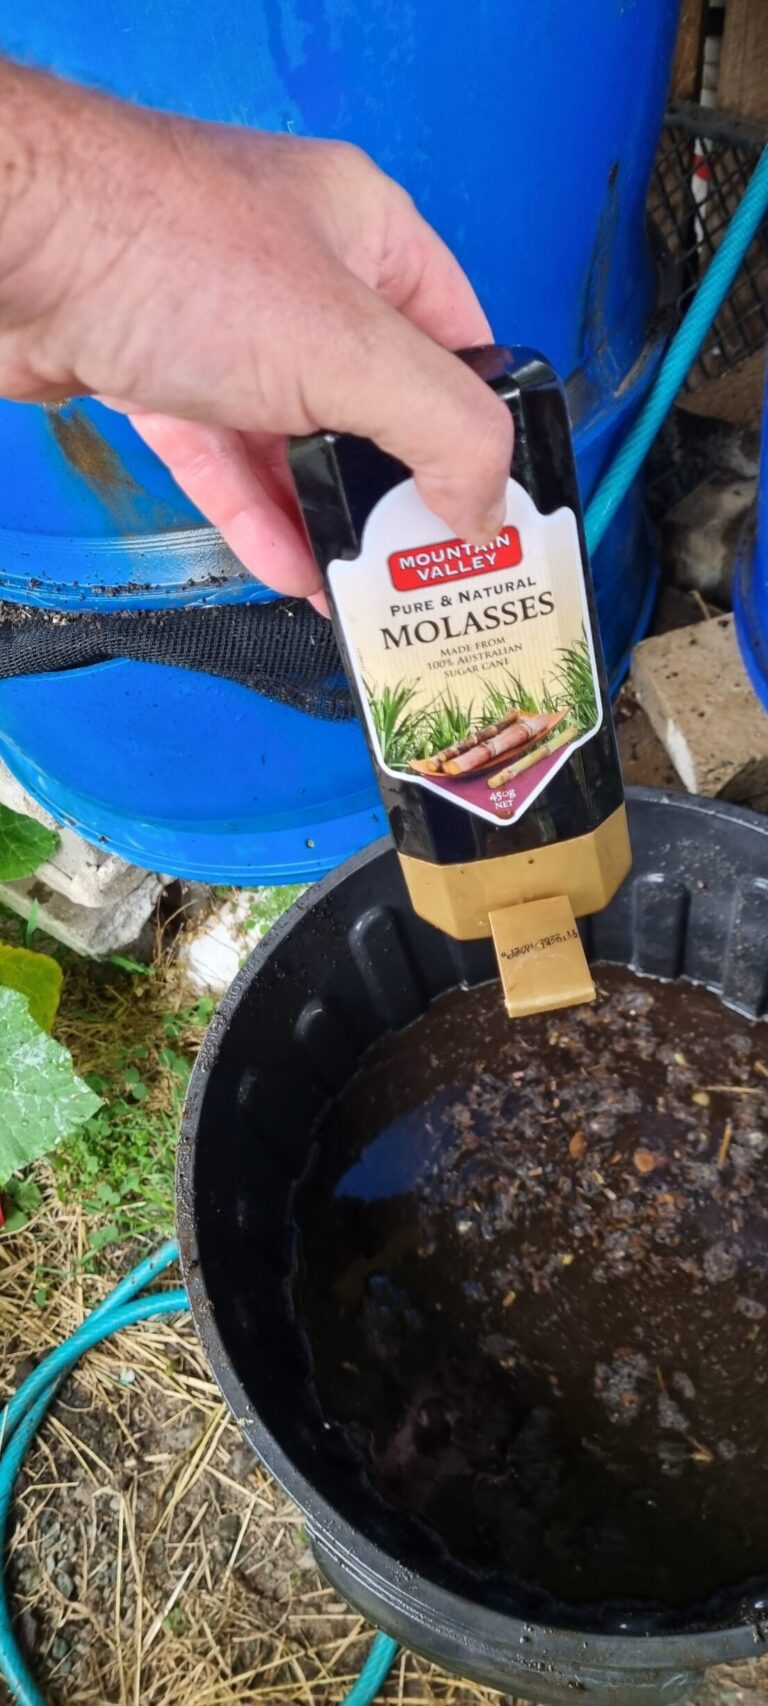 Add molasses to the mixture for the microbes.